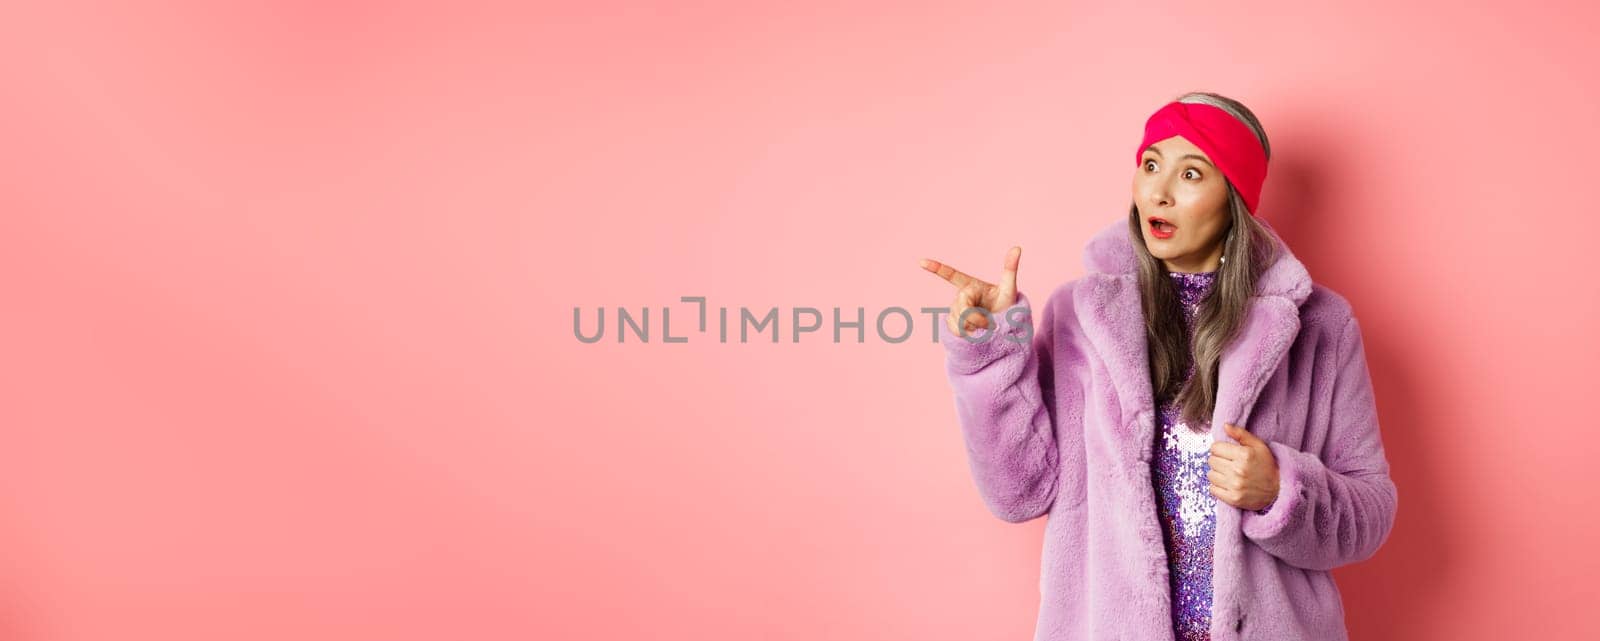 Fashion and shopping concept. Trendy elderly asian female in fake fur and glittering dress pointing, looking left with amazement, checking out offer, pink background.